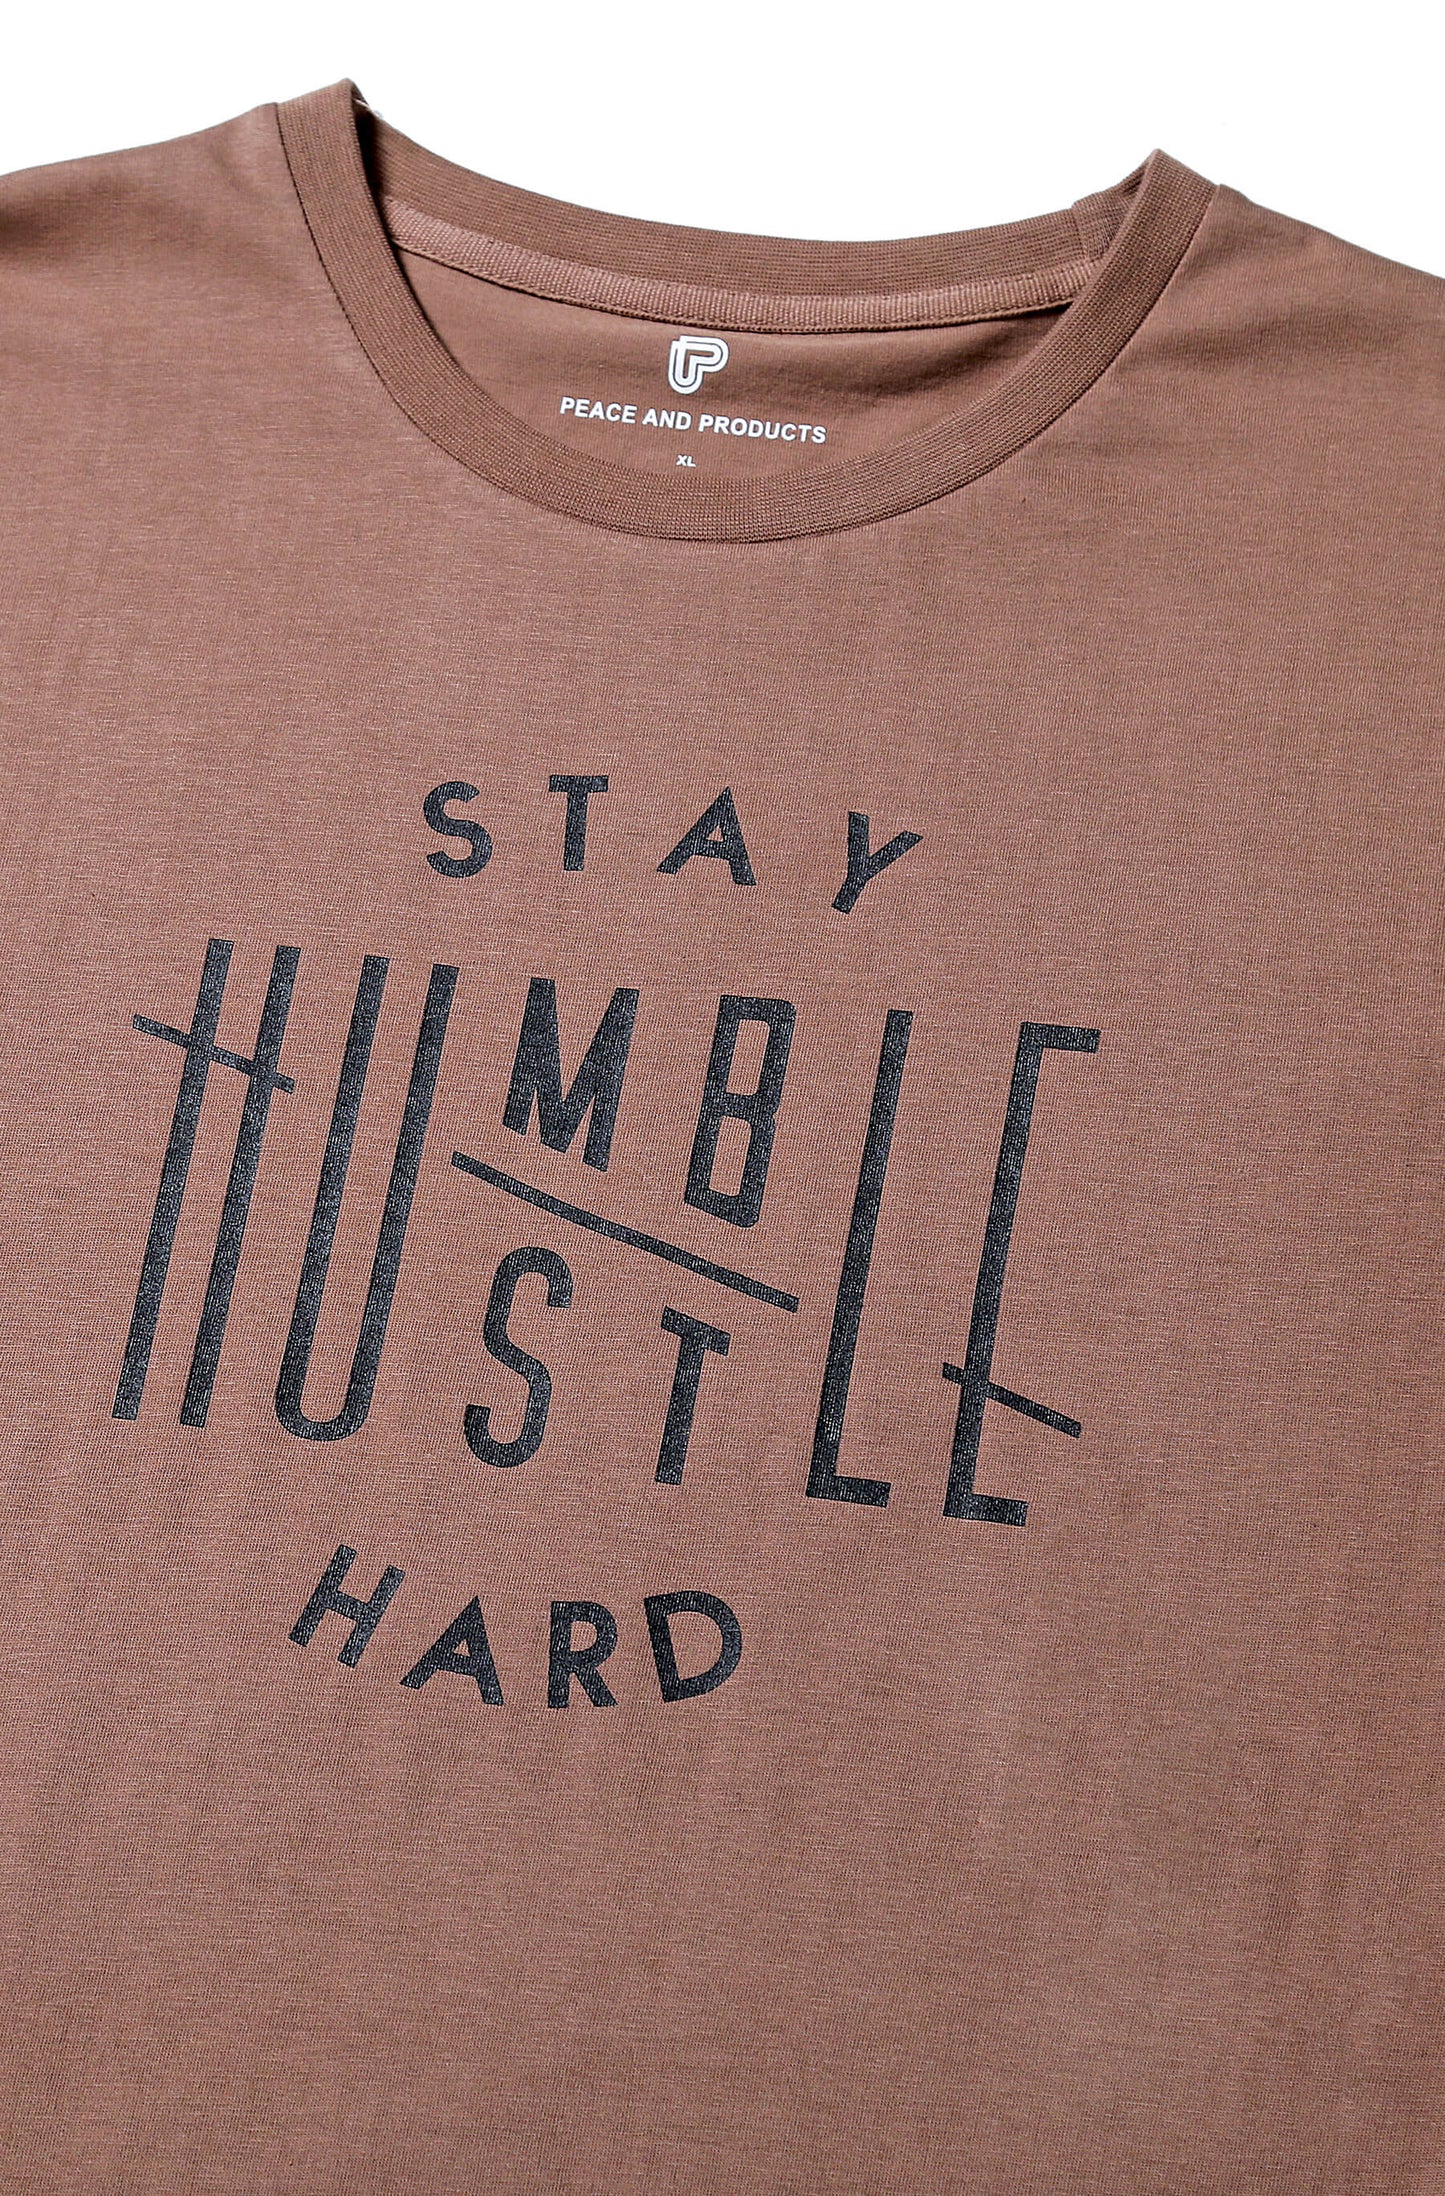 Stay Humble Hustle Hard 100% Combed Cotton Graphic T-shirt